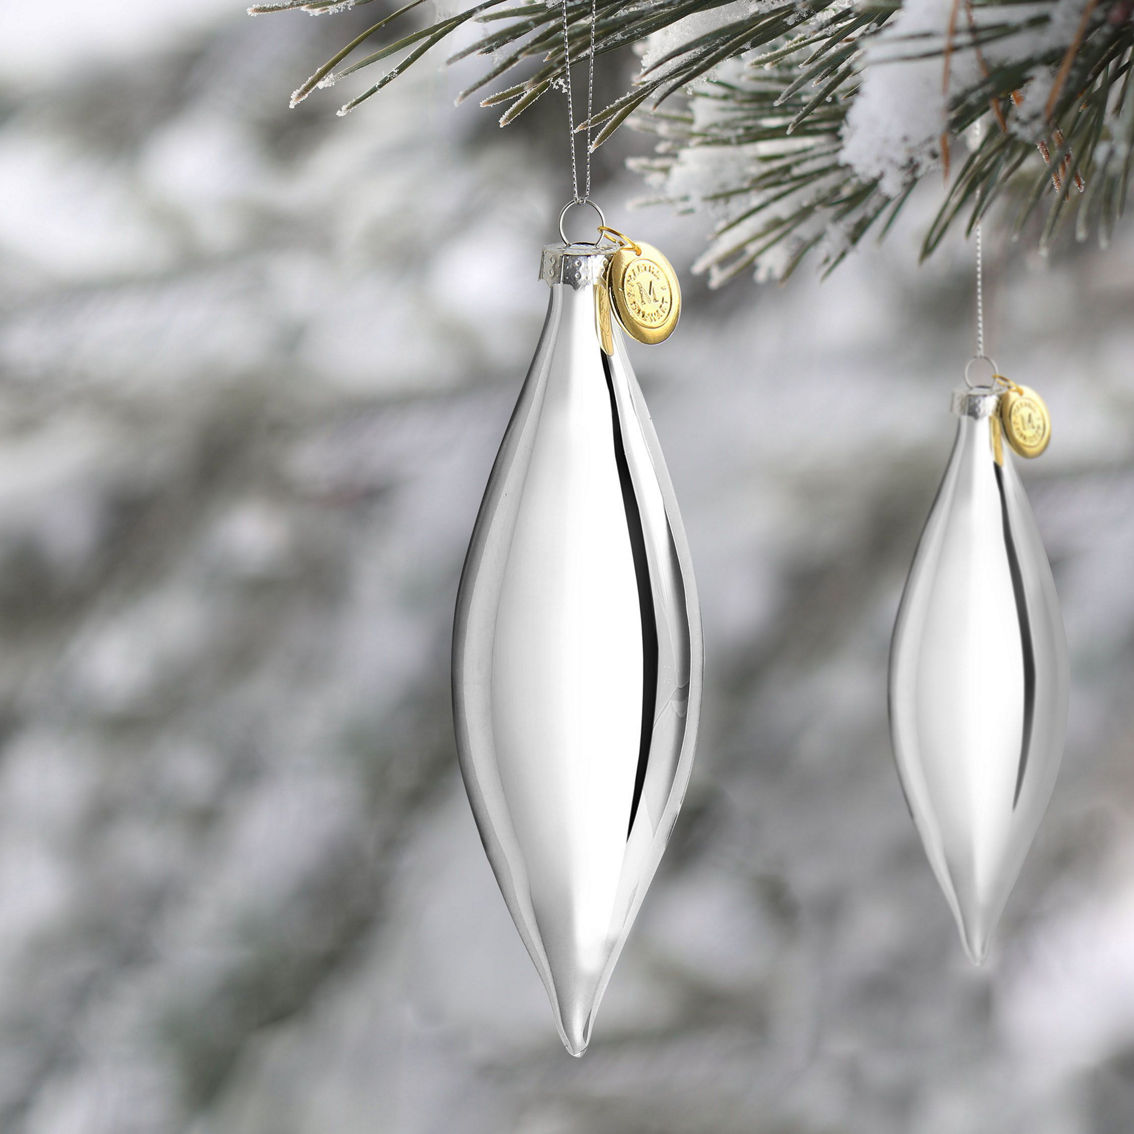 Martha Stewart Holiday Double Pointed 3 Piece Ornament Set in Silver - Image 4 of 4